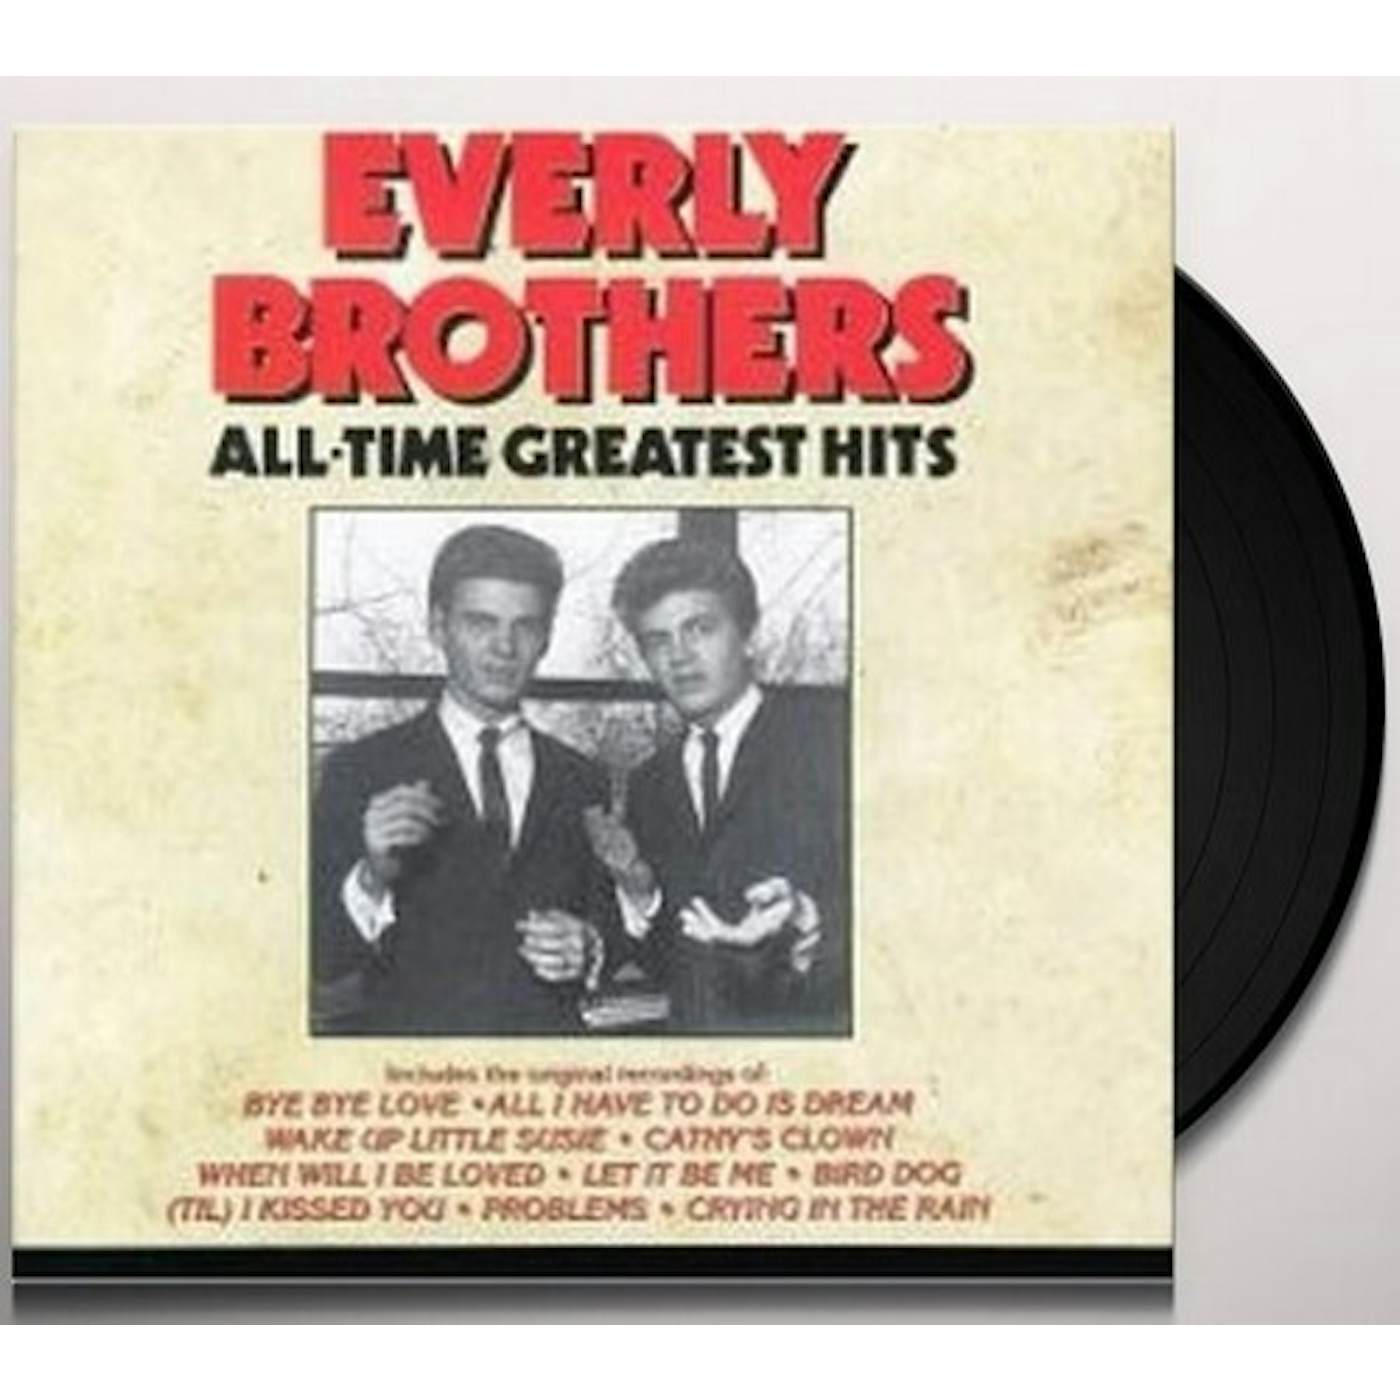 The Everly Brothers ALL-TIME GREATEST HITS Vinyl Record